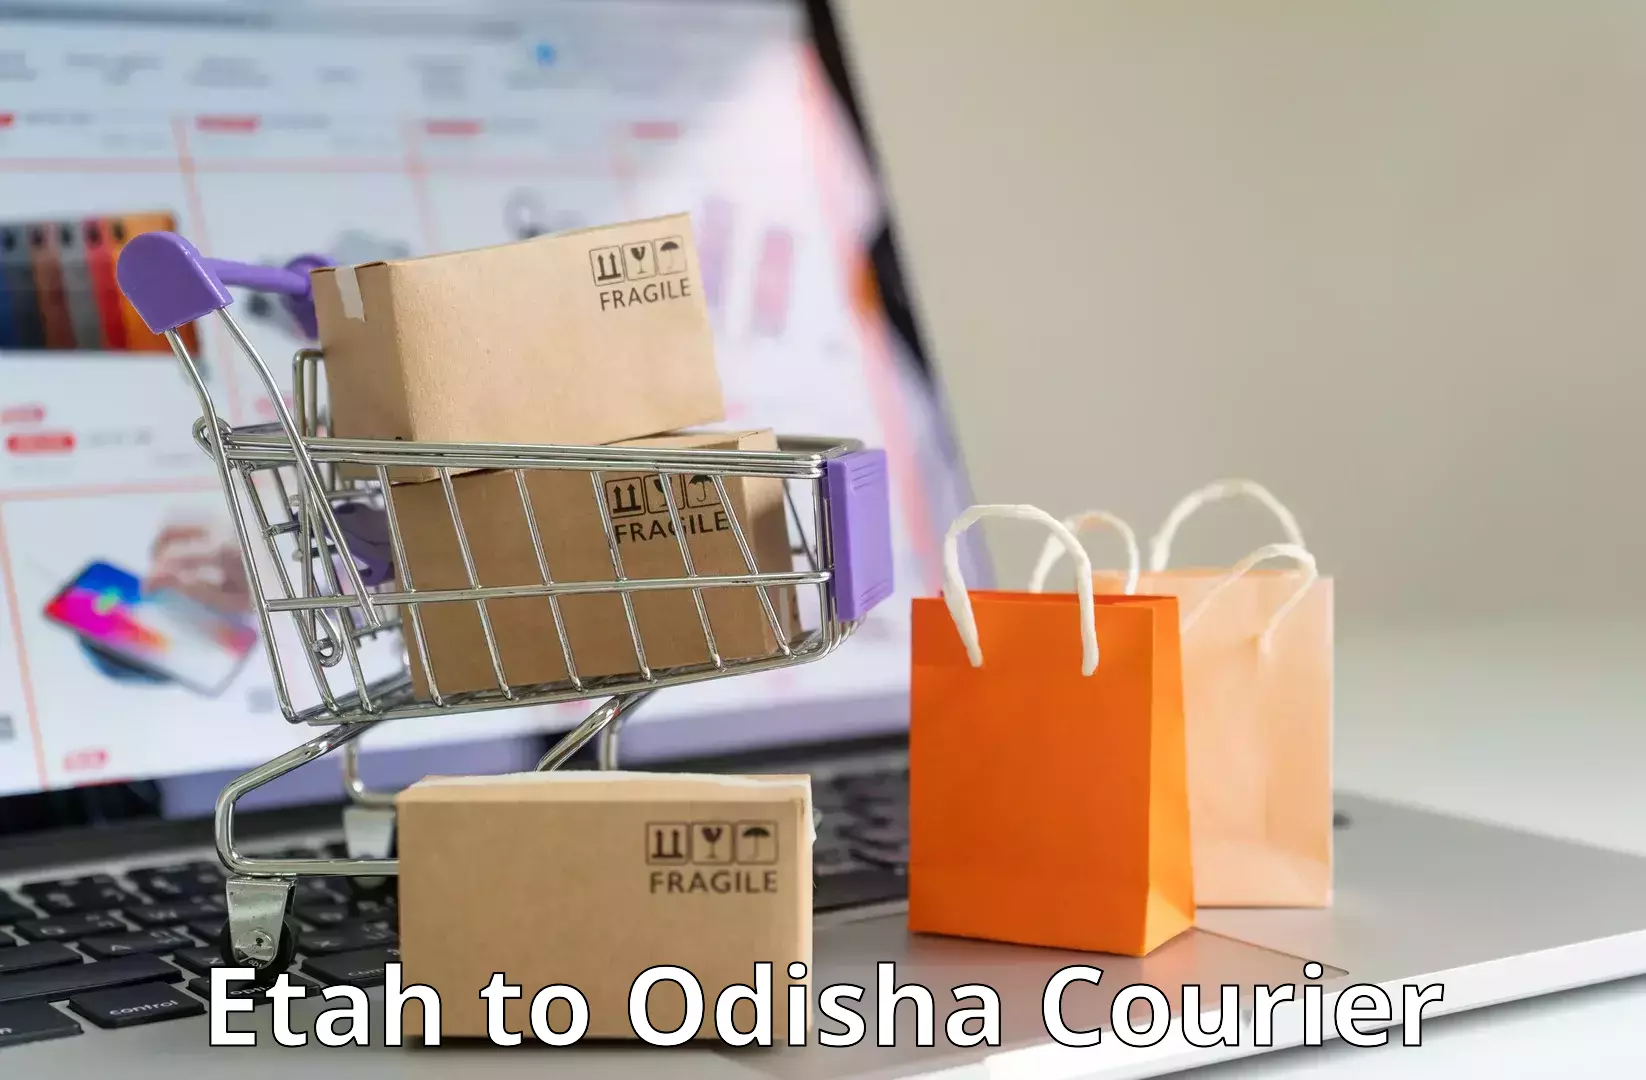 State-of-the-art courier technology Etah to Gajapati